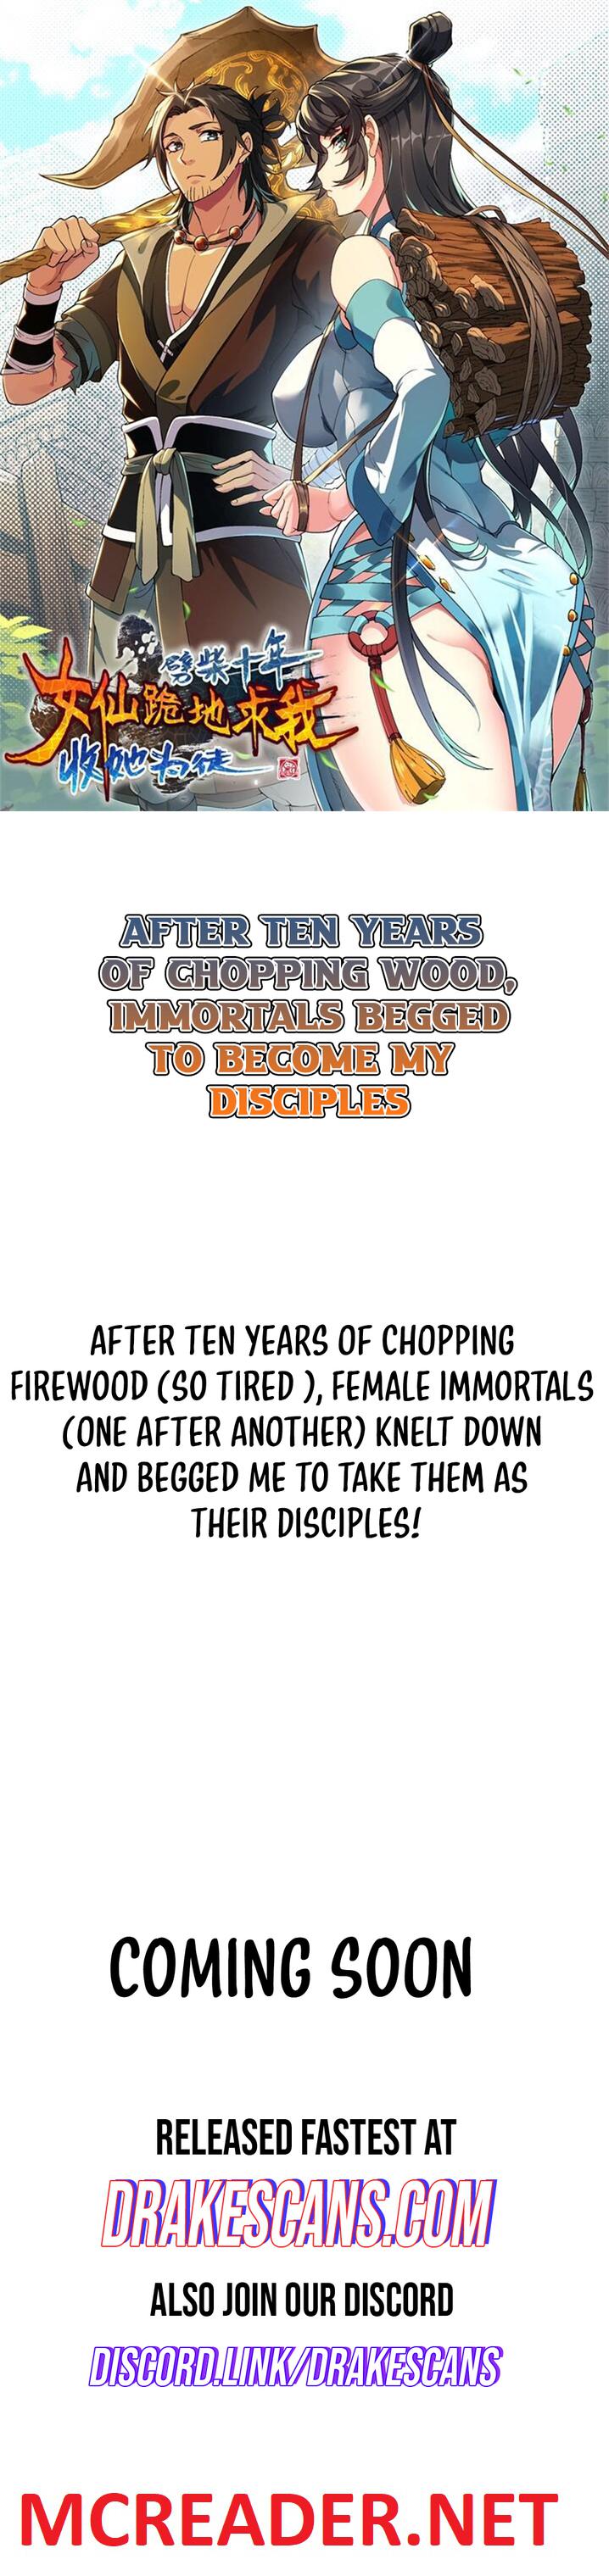 After Ten Years Of Chopping Wood, Immortals Begged To Become My Disciples - Page 1